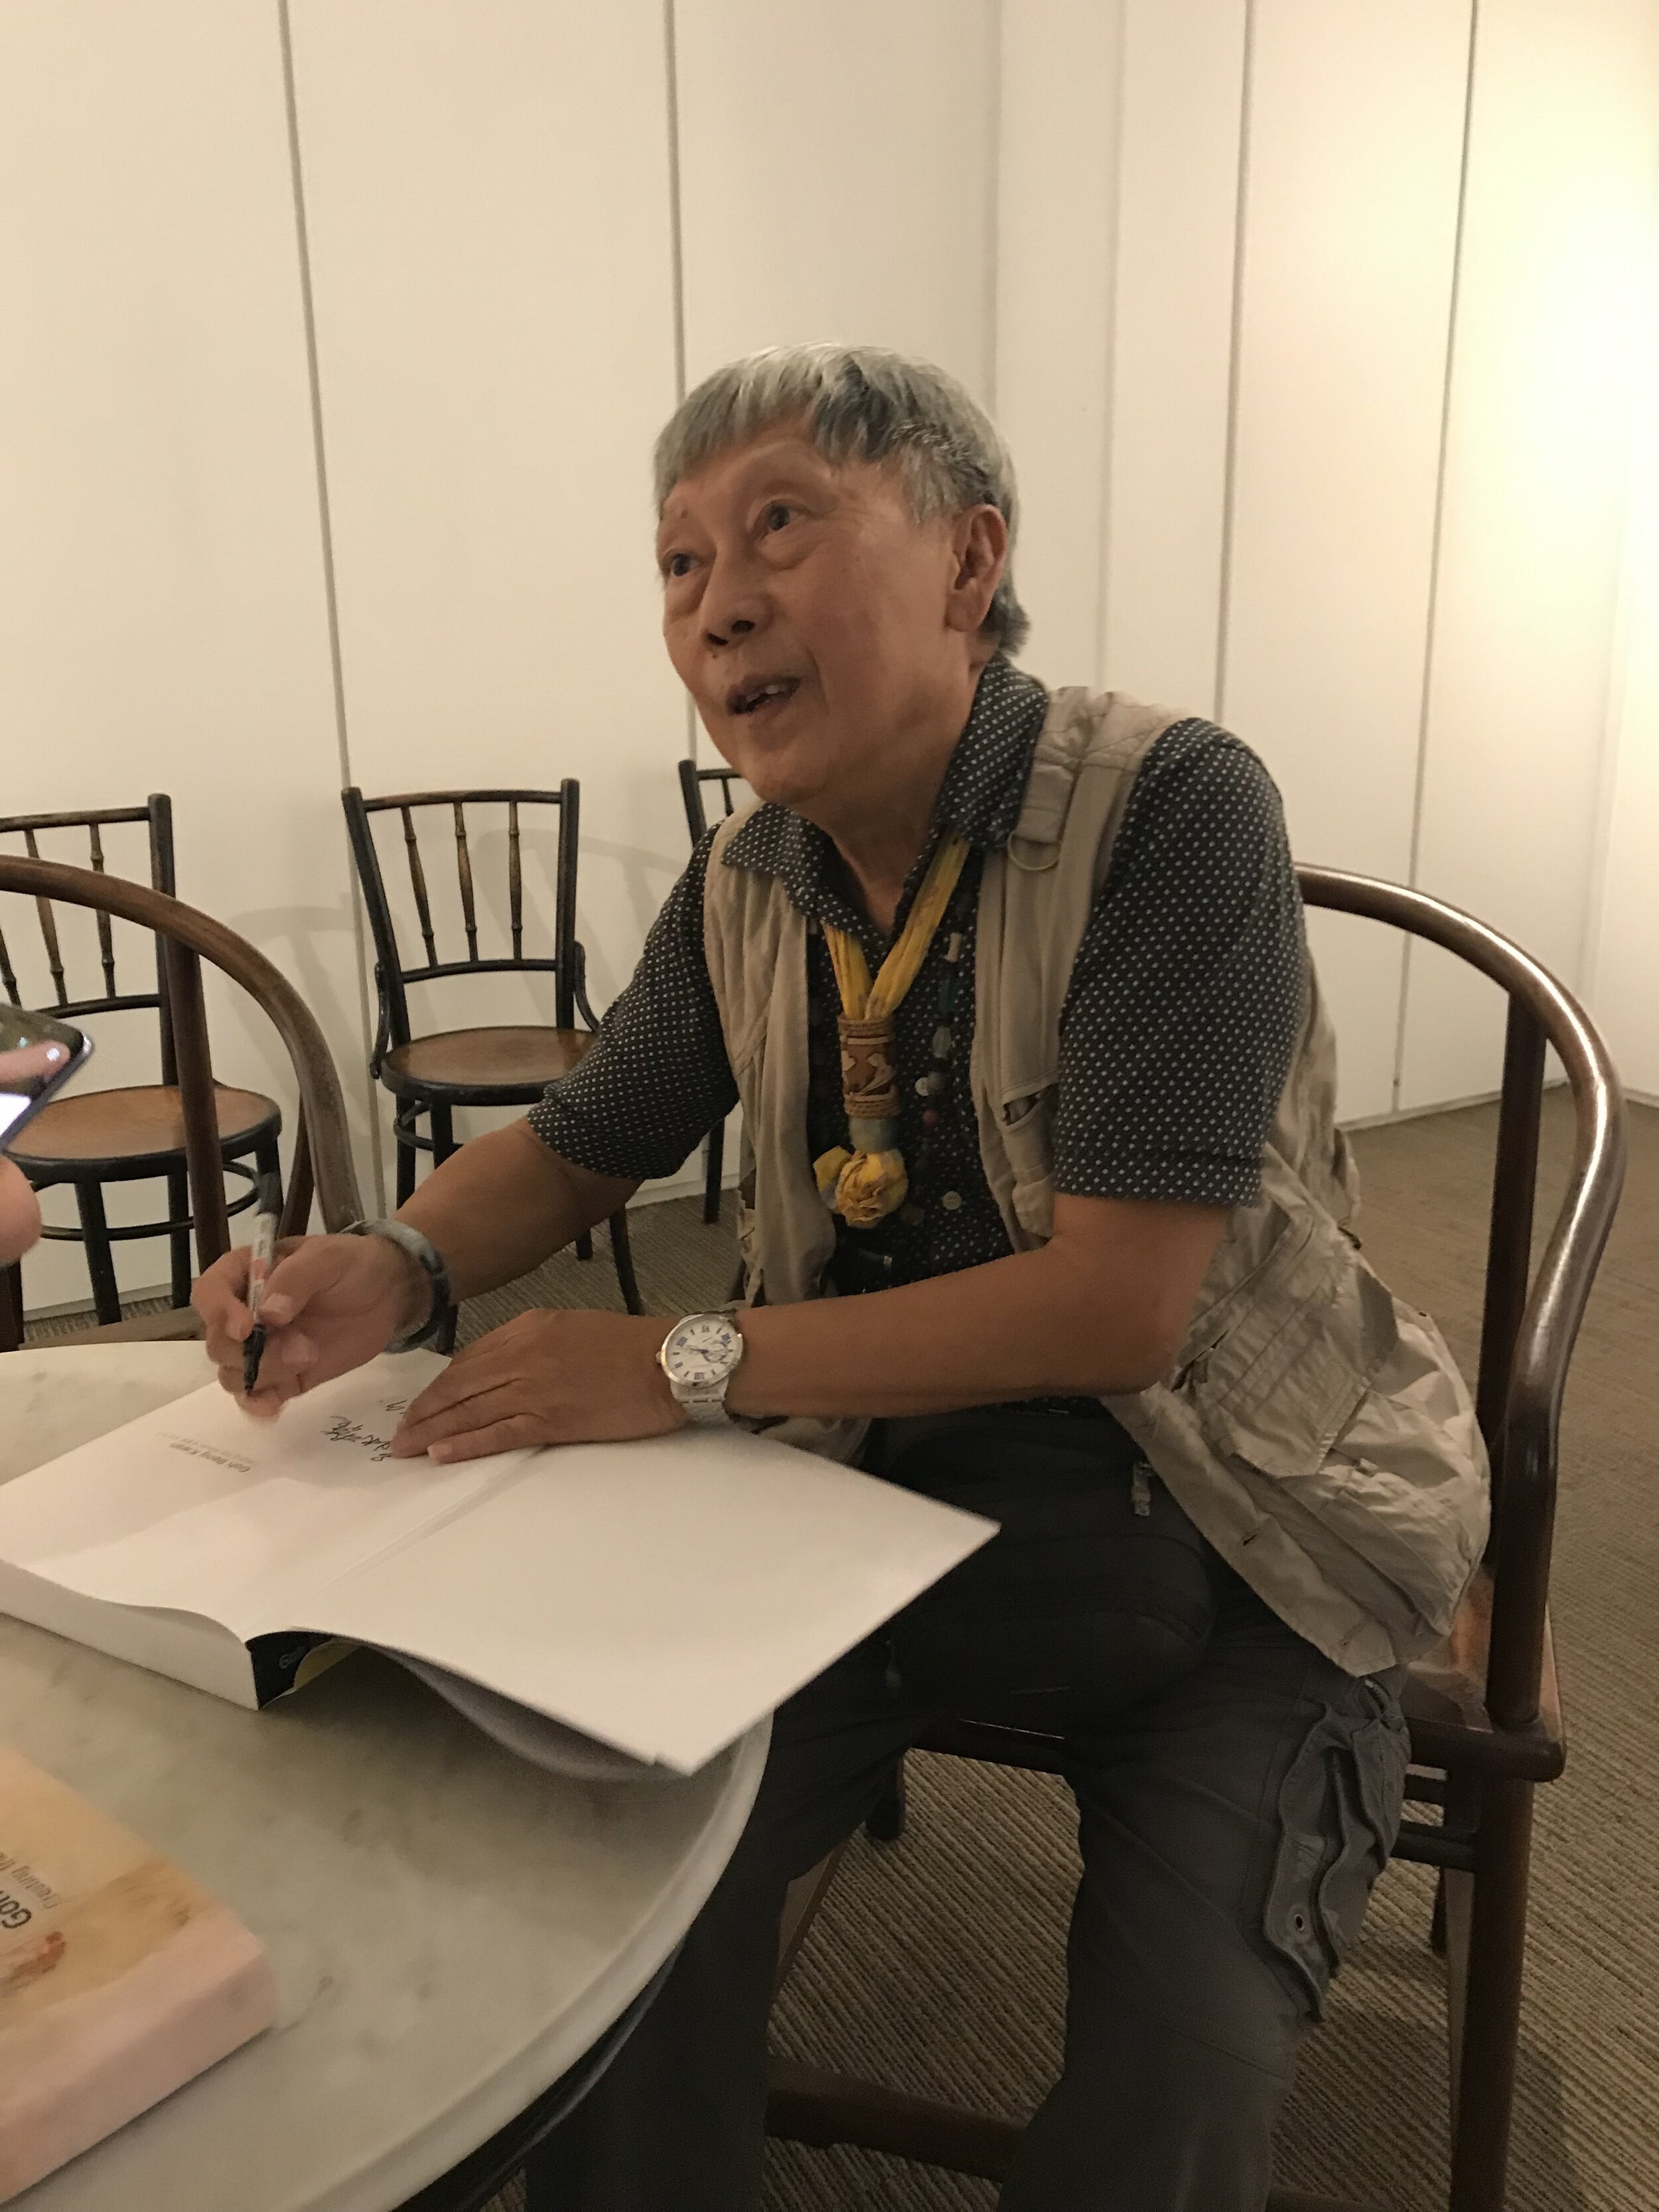  Mr Goh Beng Kwan signing his art catalogue during hi solo exhibition in 2019 